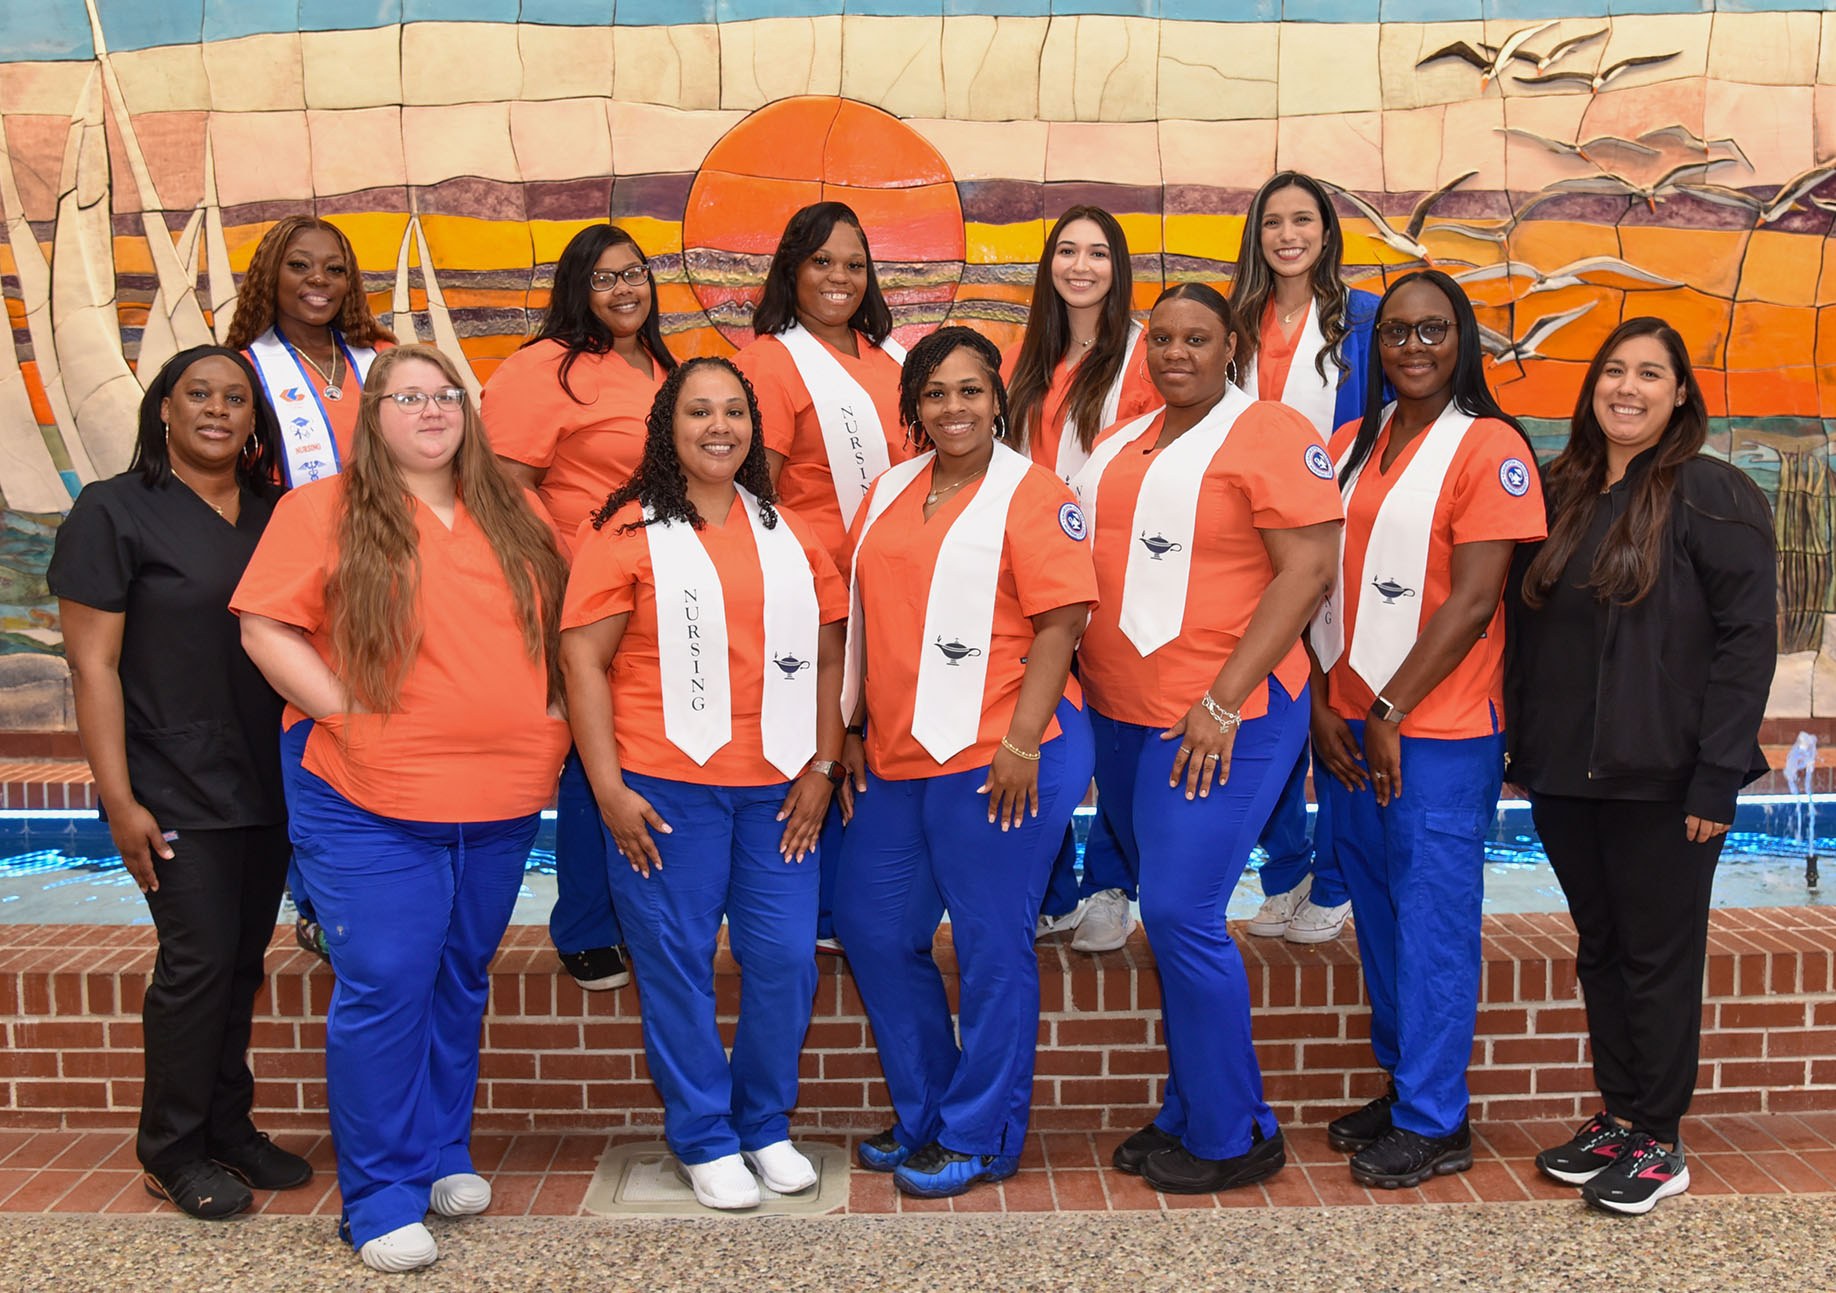 12 nursing students in scrubs pose in front of a sunset mural